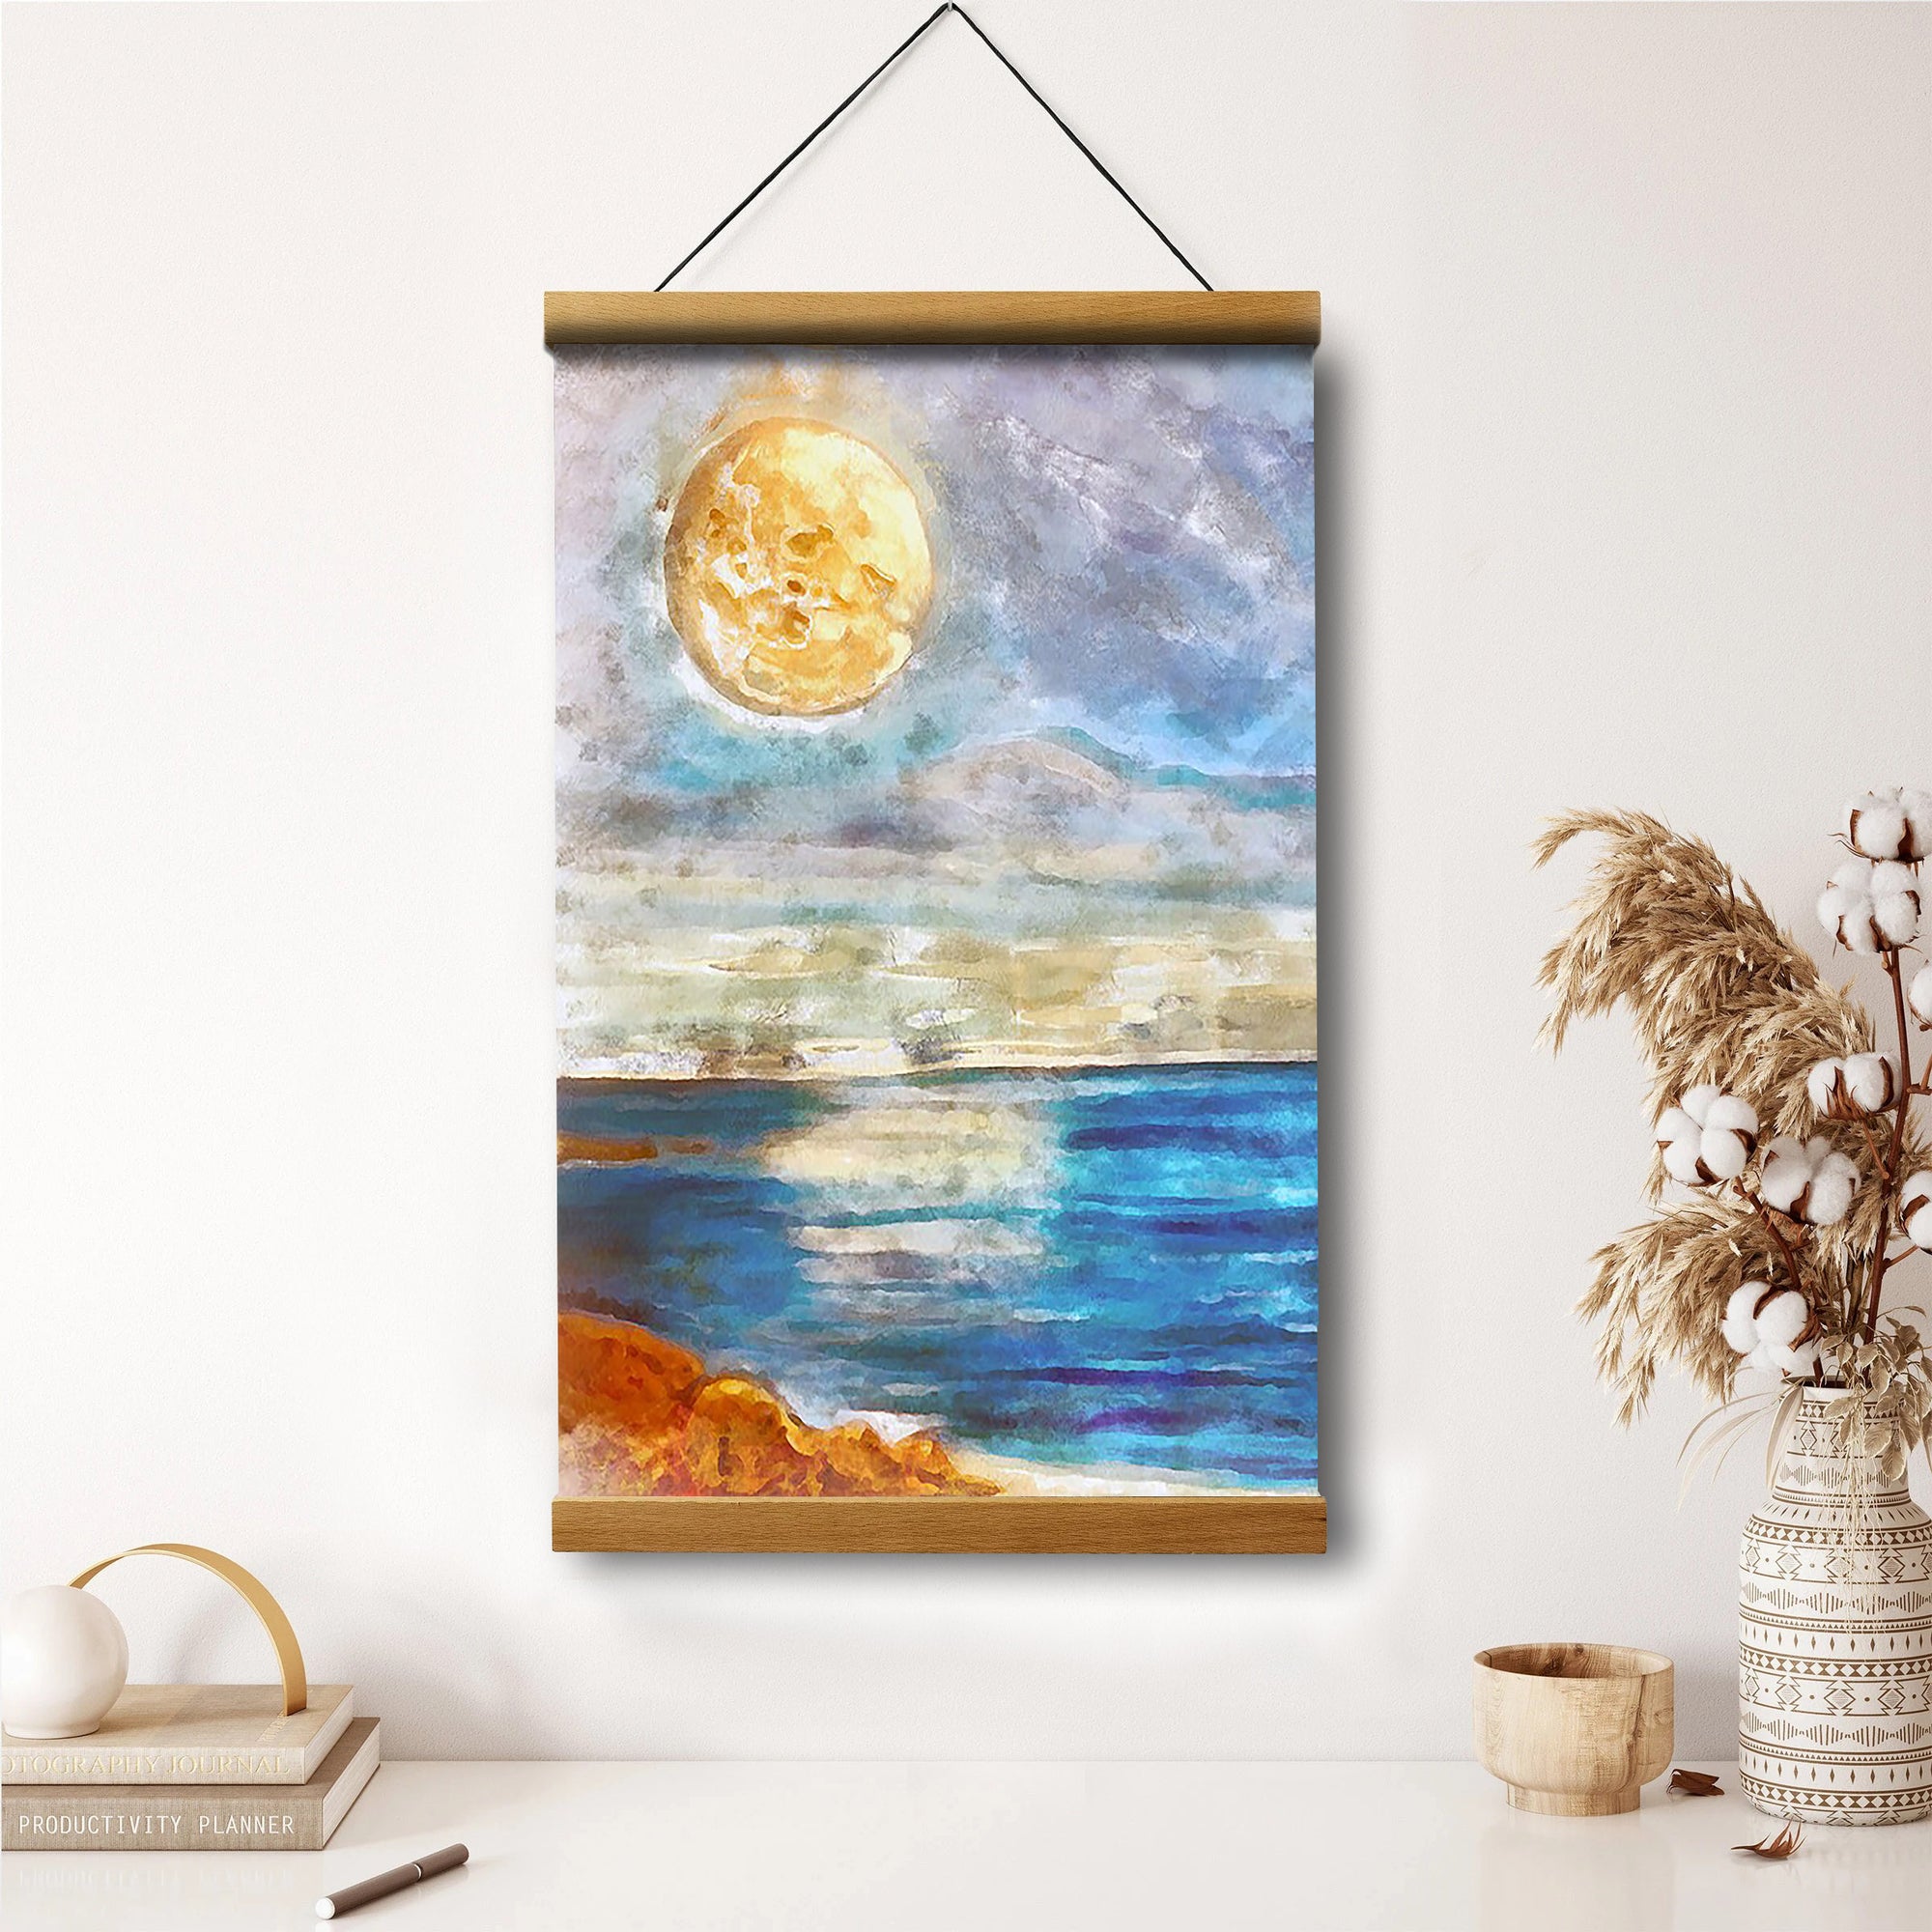 Seascape Sunset Moon Painting Hanging Canvas Wall Art - Canvas Wall Decor - Home Decor Living Room